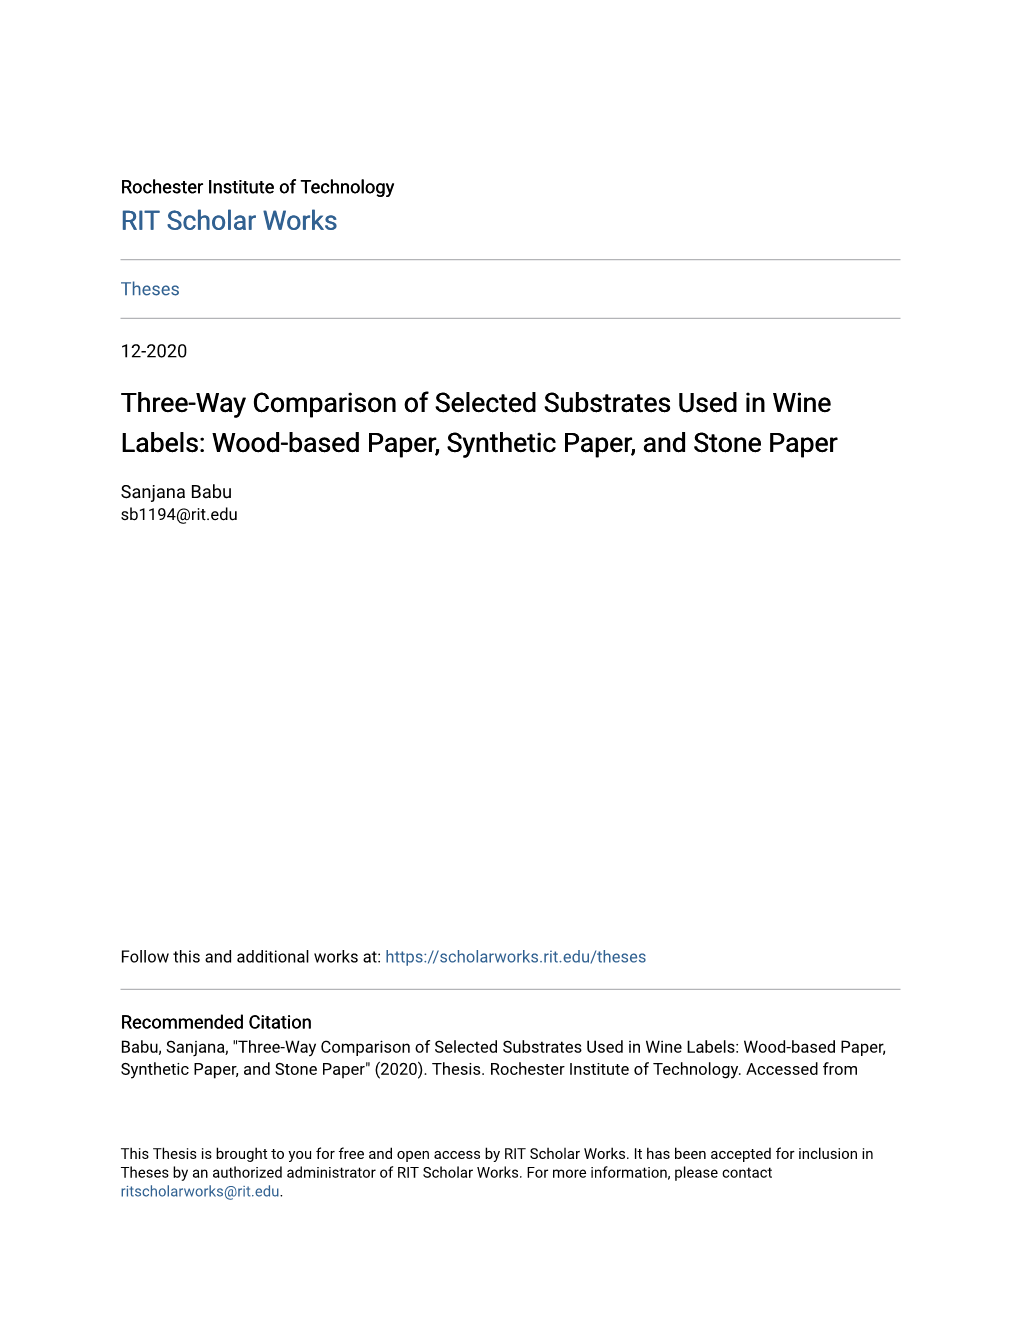 Three-Way Comparison of Selected Substrates Used in Wine Labels: Wood-Based Paper, Synthetic Paper, and Stone Paper